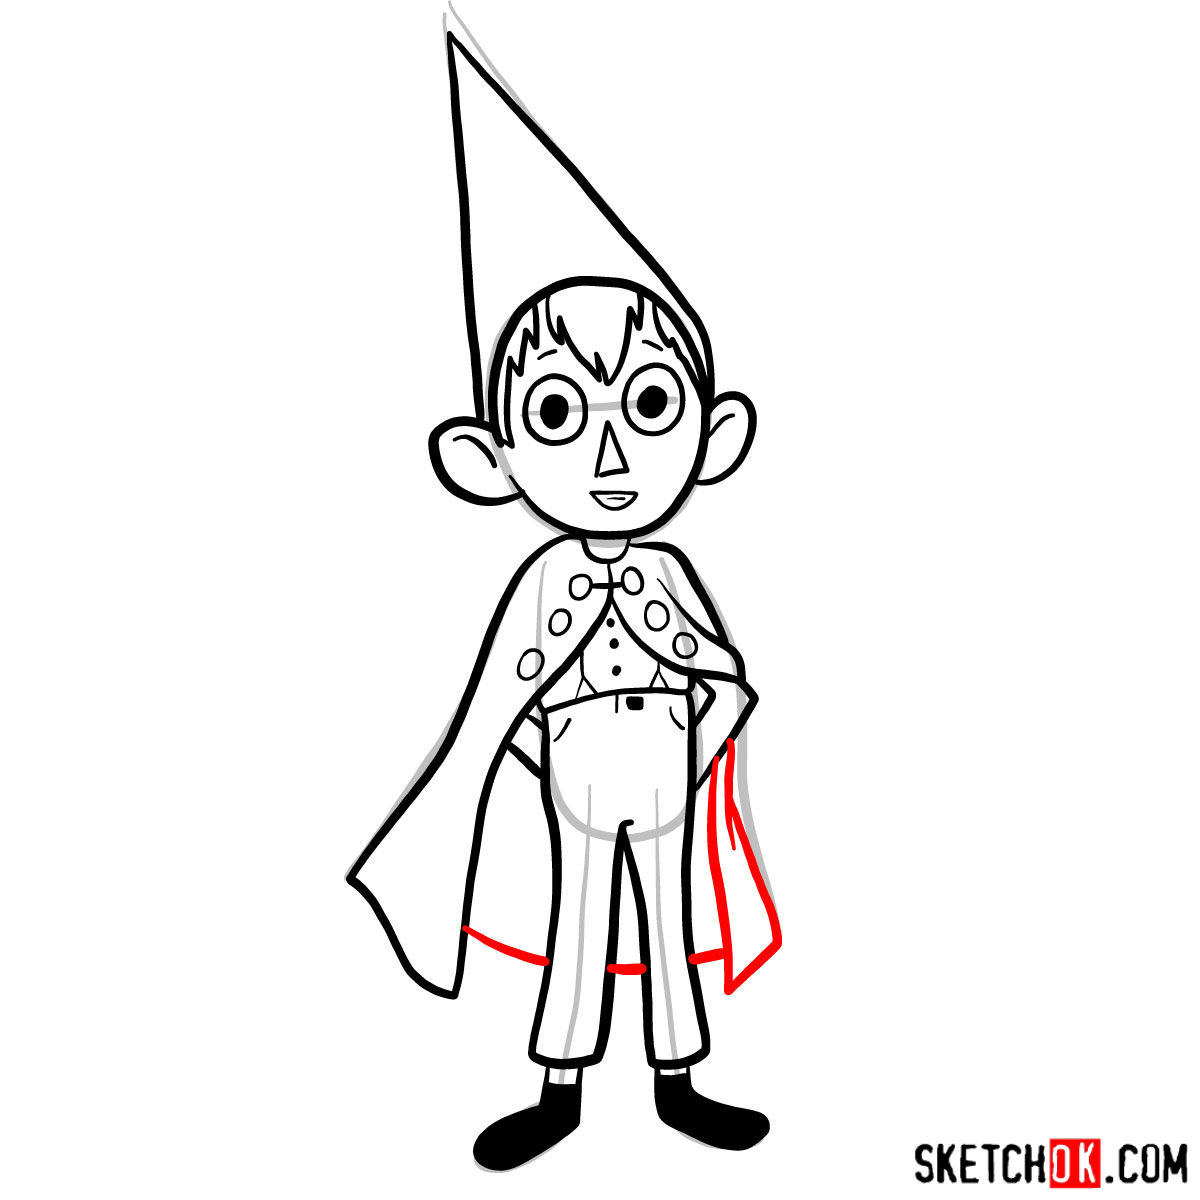 How to draw Wirt from Over the Garden Wall